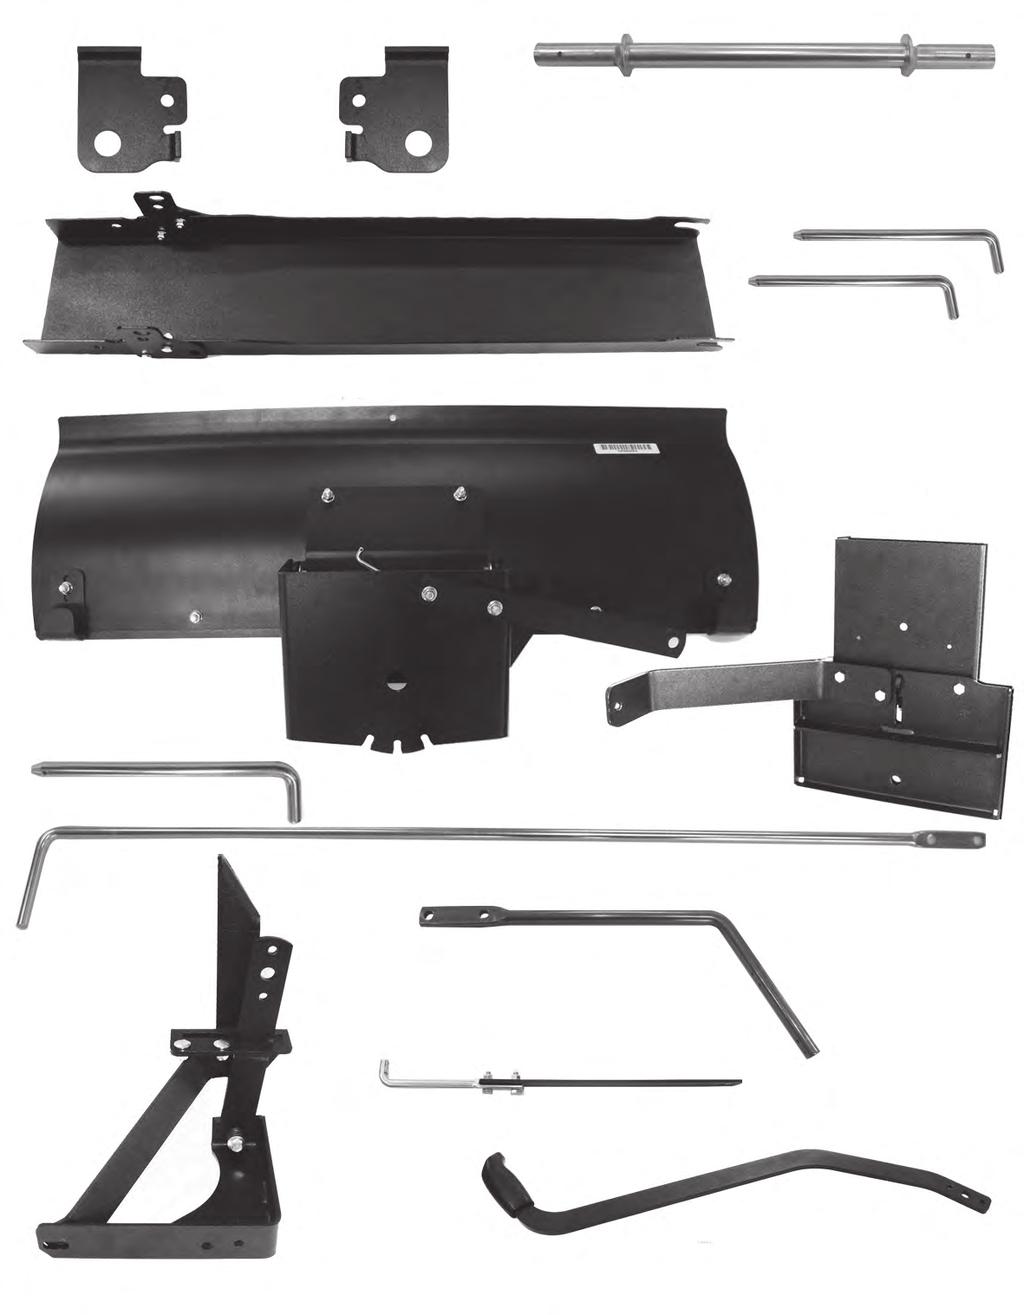 AA - HITCH SUPPORTS Right (Hardware Bag) BB - HITCH SUPPORTS Left (Hardware Bag) CC - REAR SUPPORT ROD Box Contents DD - SUB-FRAME ASSEMBLY EE - LATCH ROD (Qty.